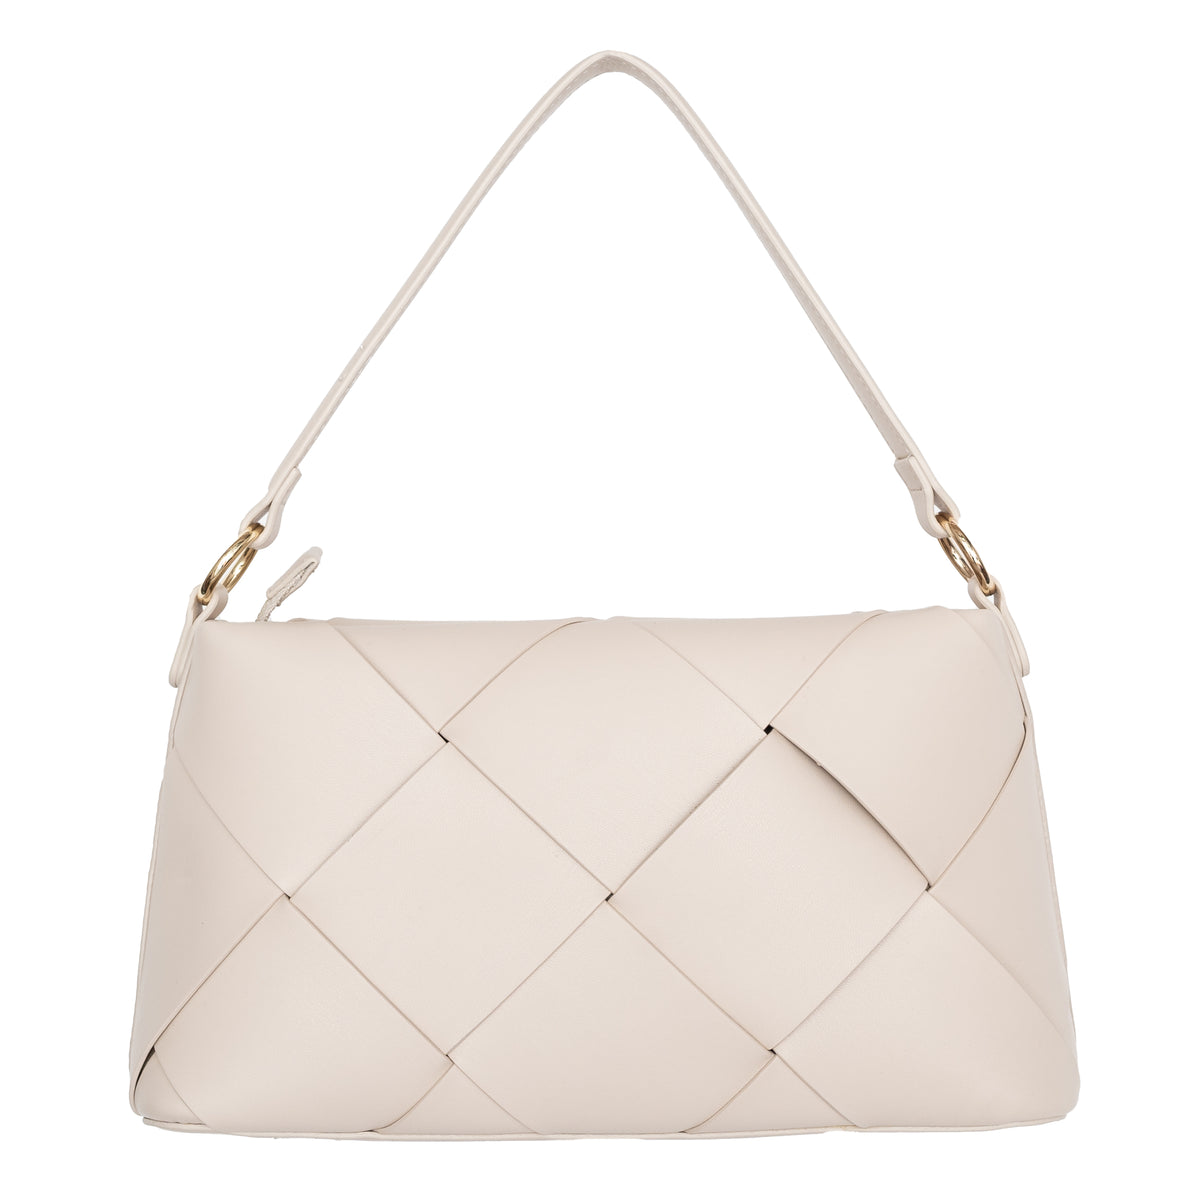 Load image into Gallery viewer, Valentino Bags Off White Ibiza Shoulder Bag
